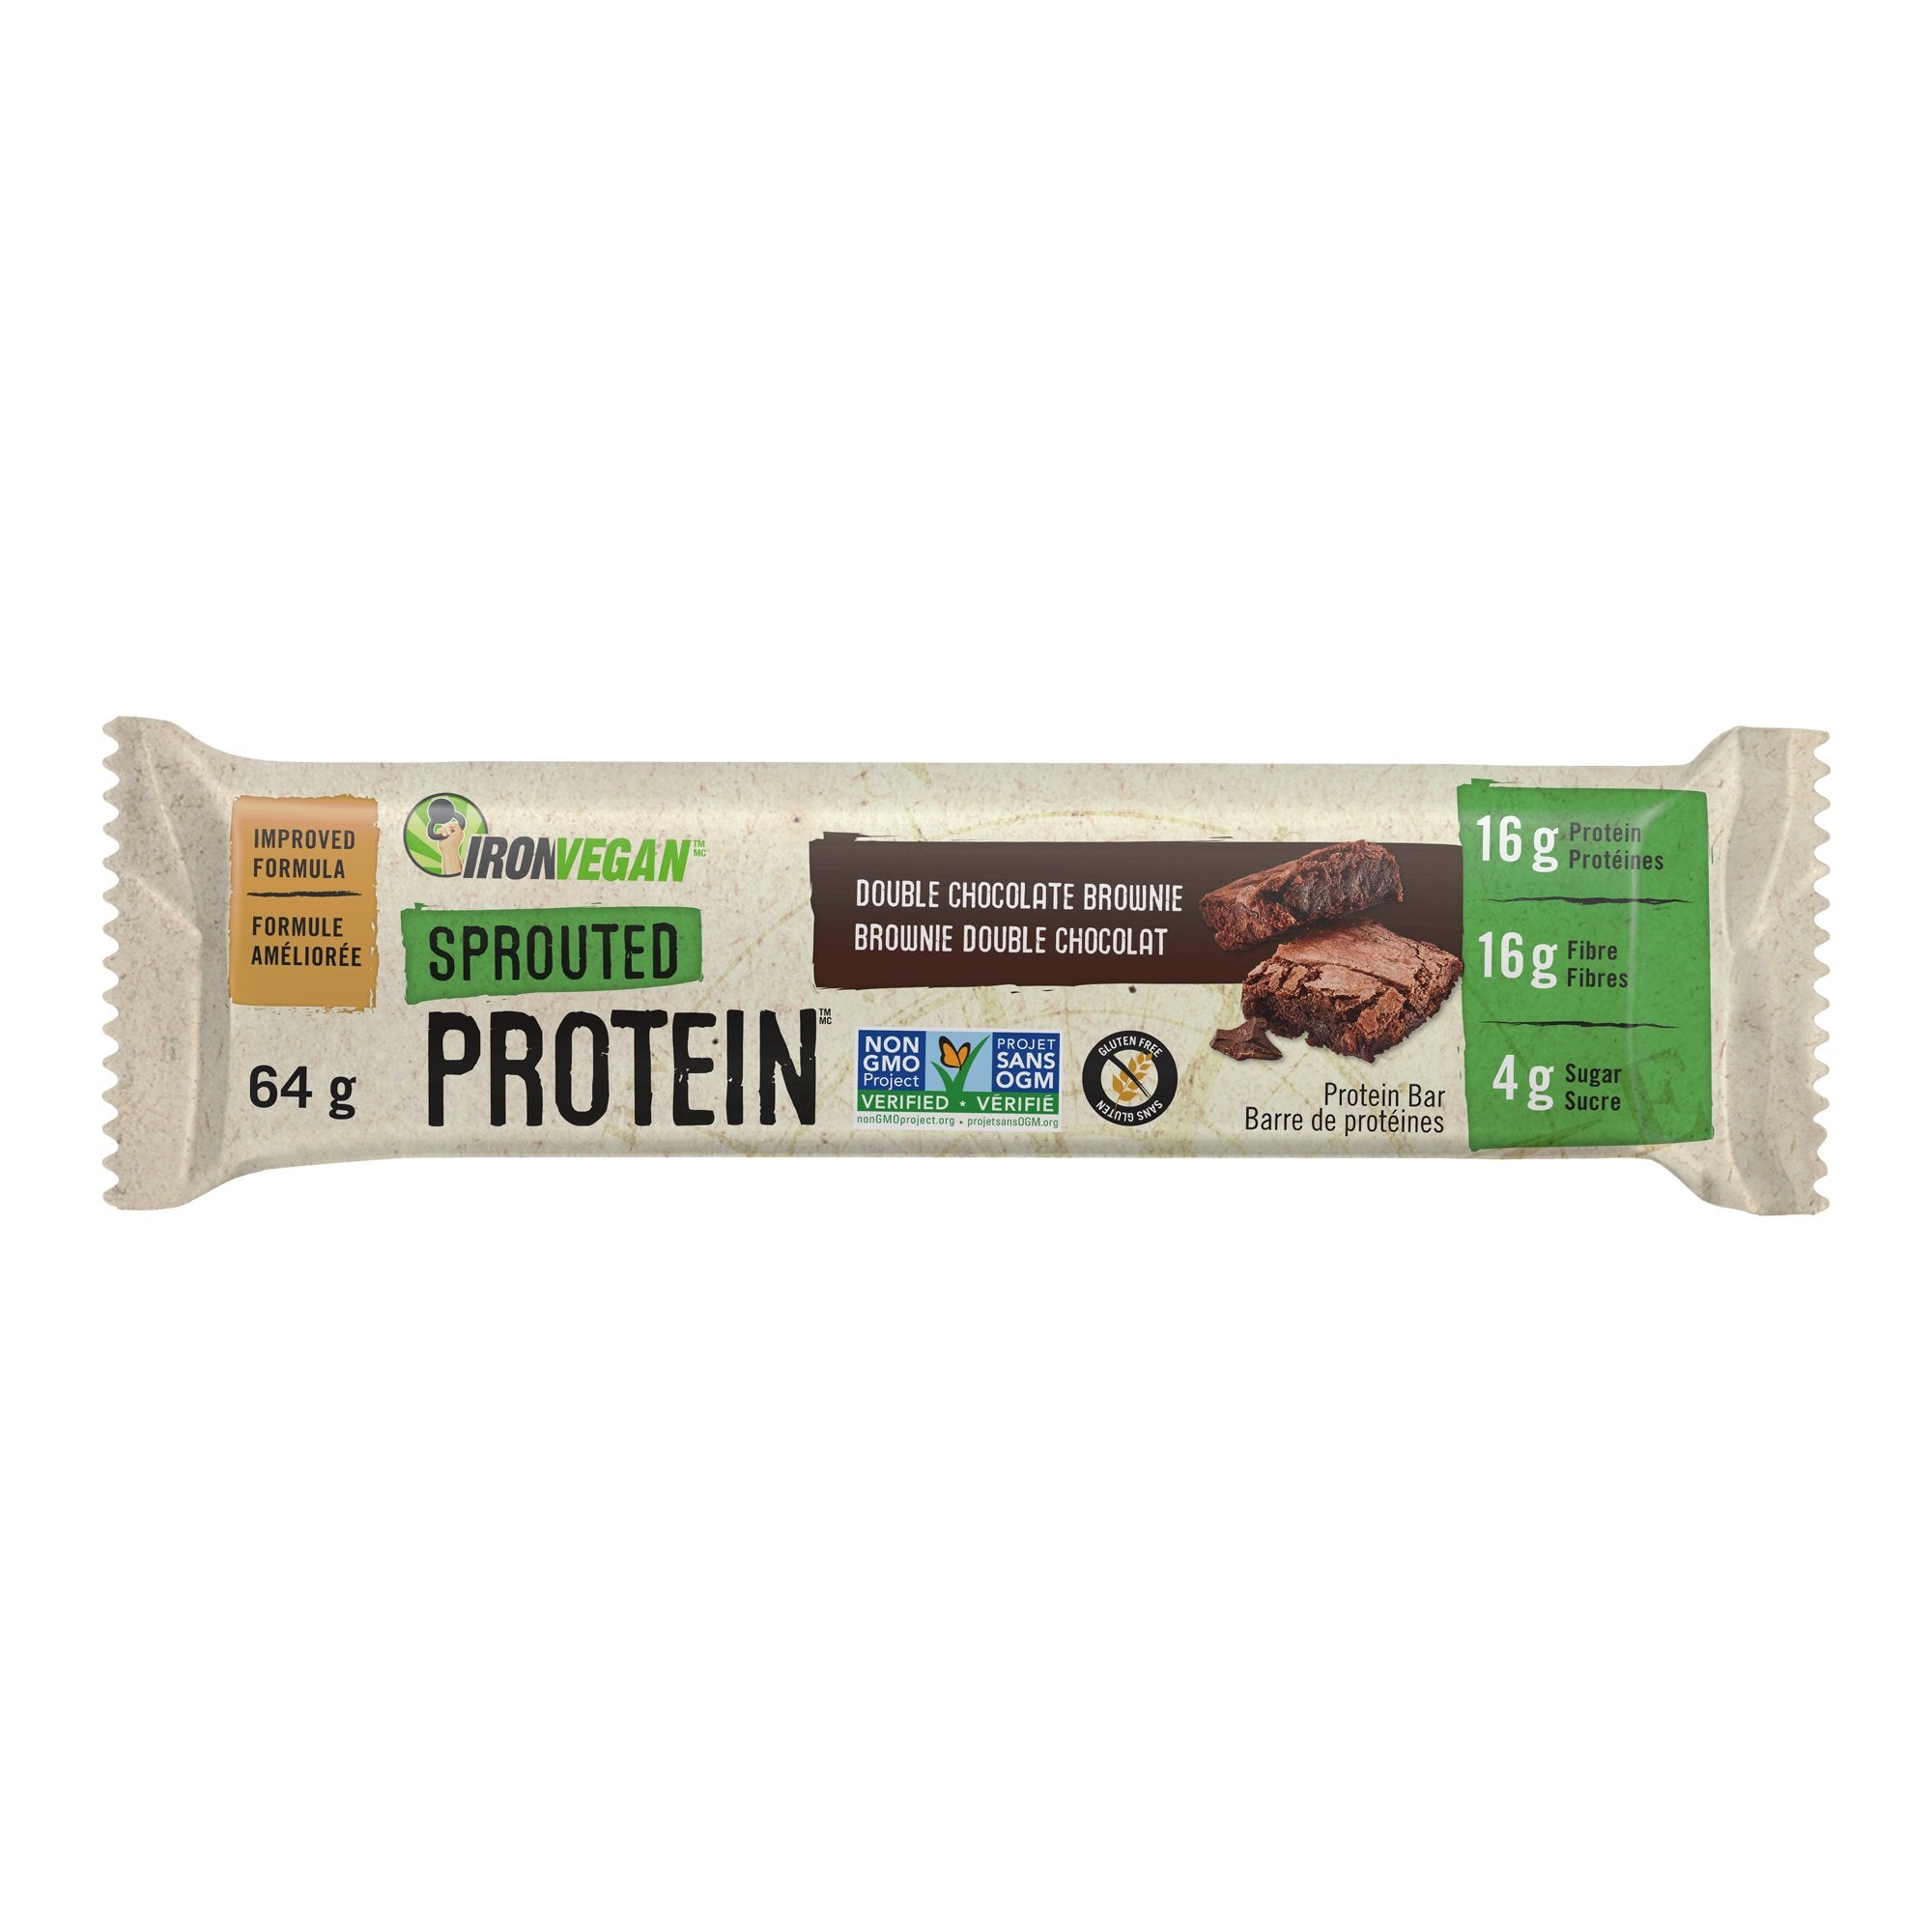 Iron Vegan Double Chocolate Brownie Sprouted Protein Bar 64g